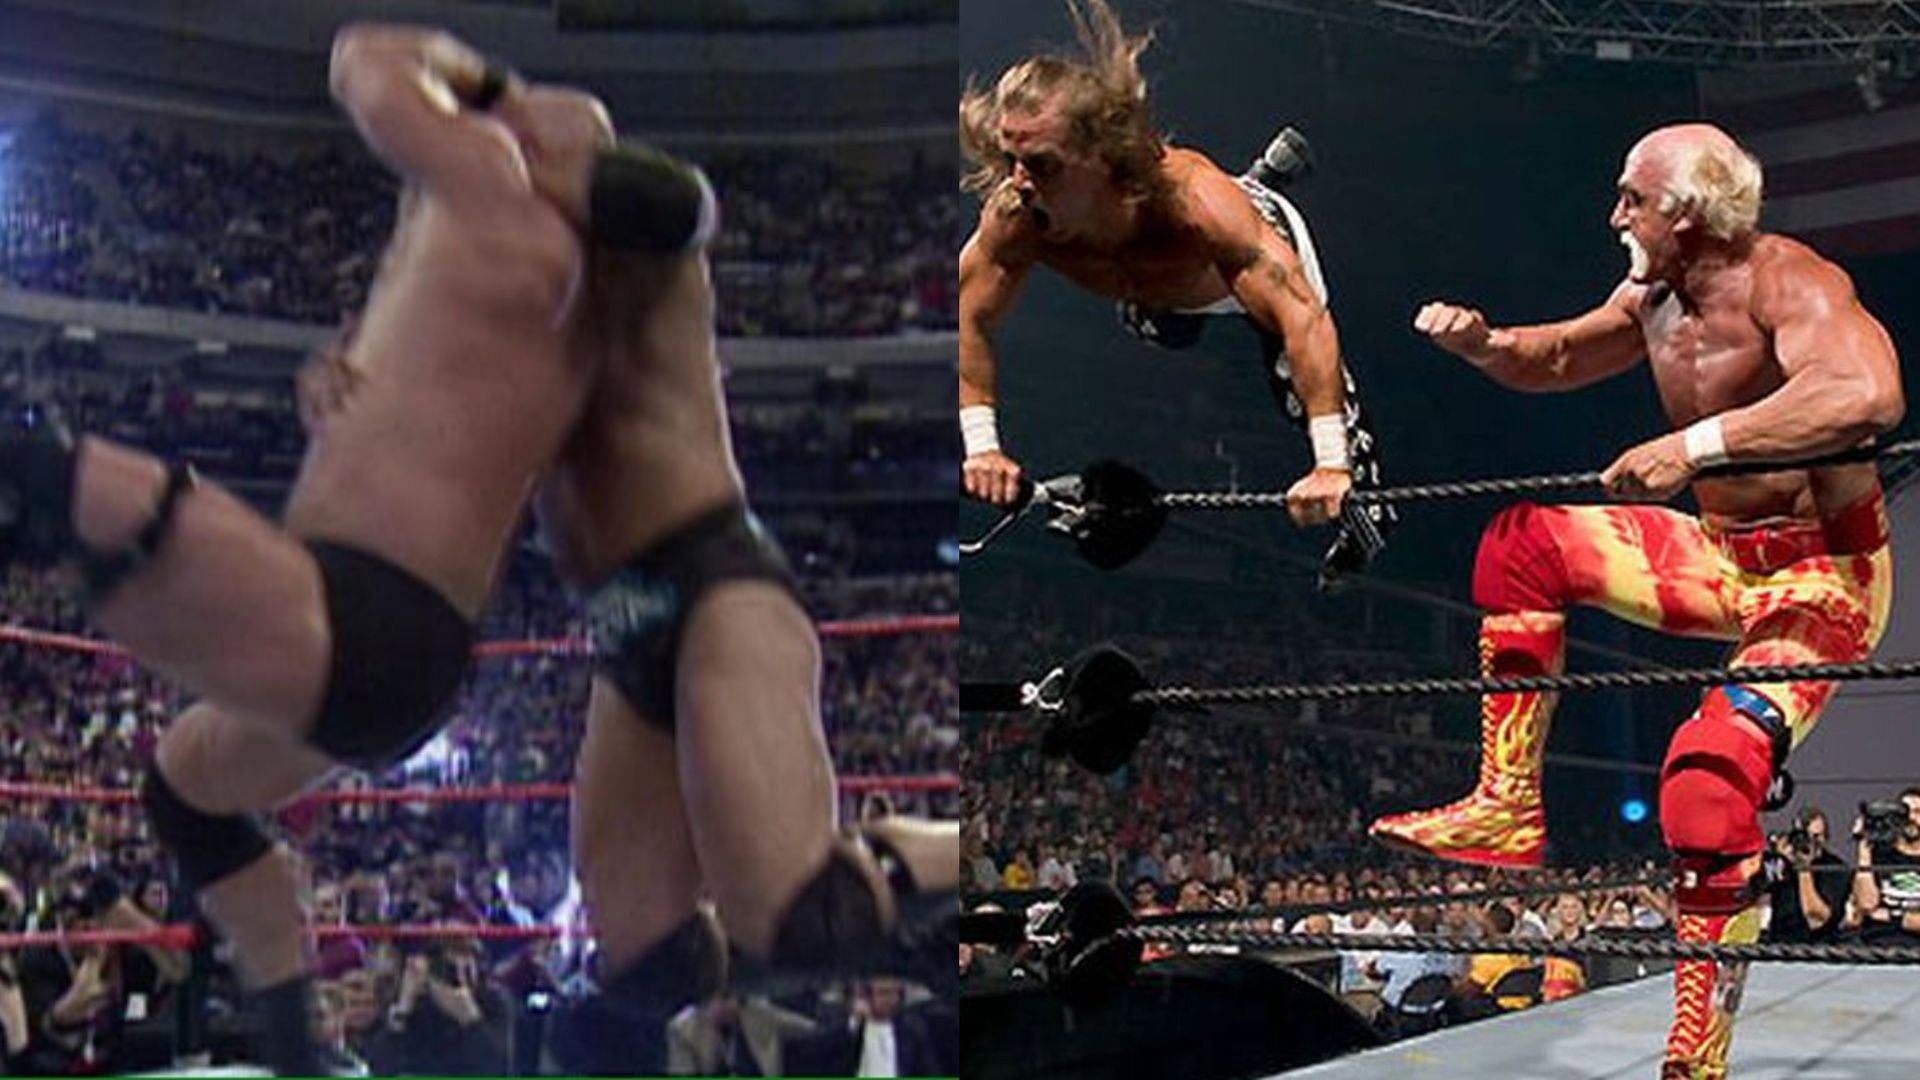 The Rock and Shawn Michaels used to sell moves like no other.